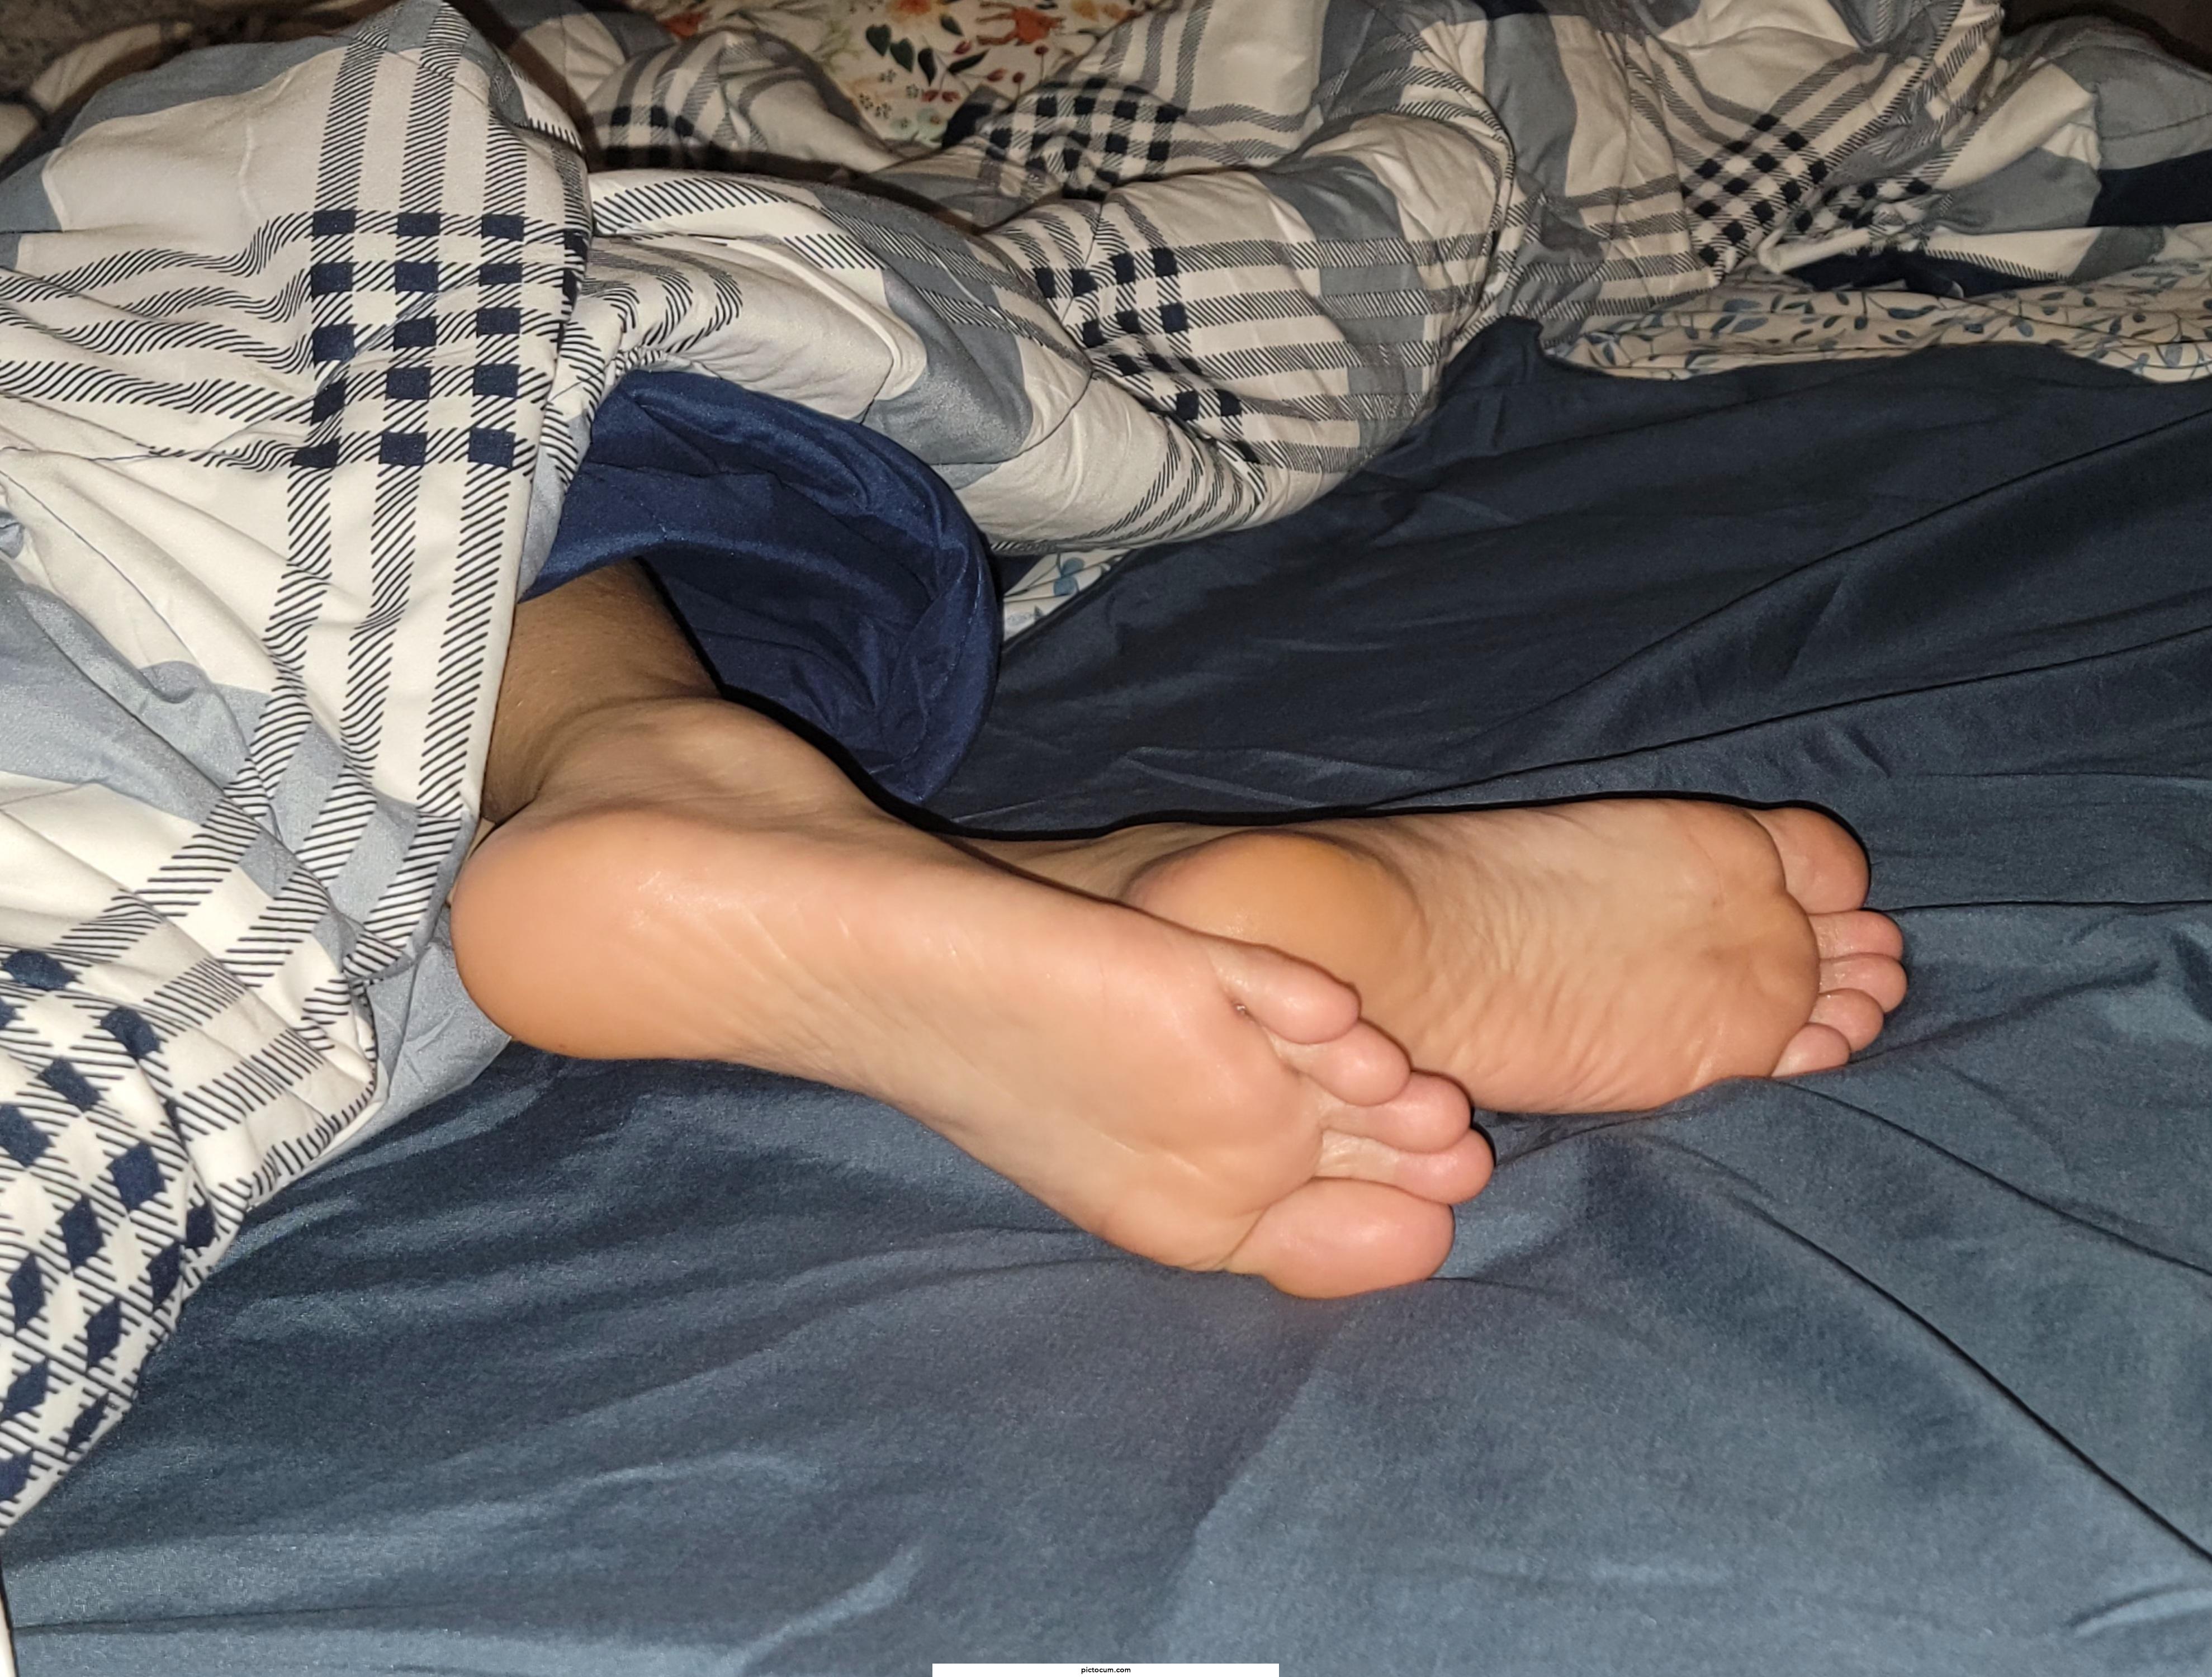 My soft soles demands your attention 👣👅 OC